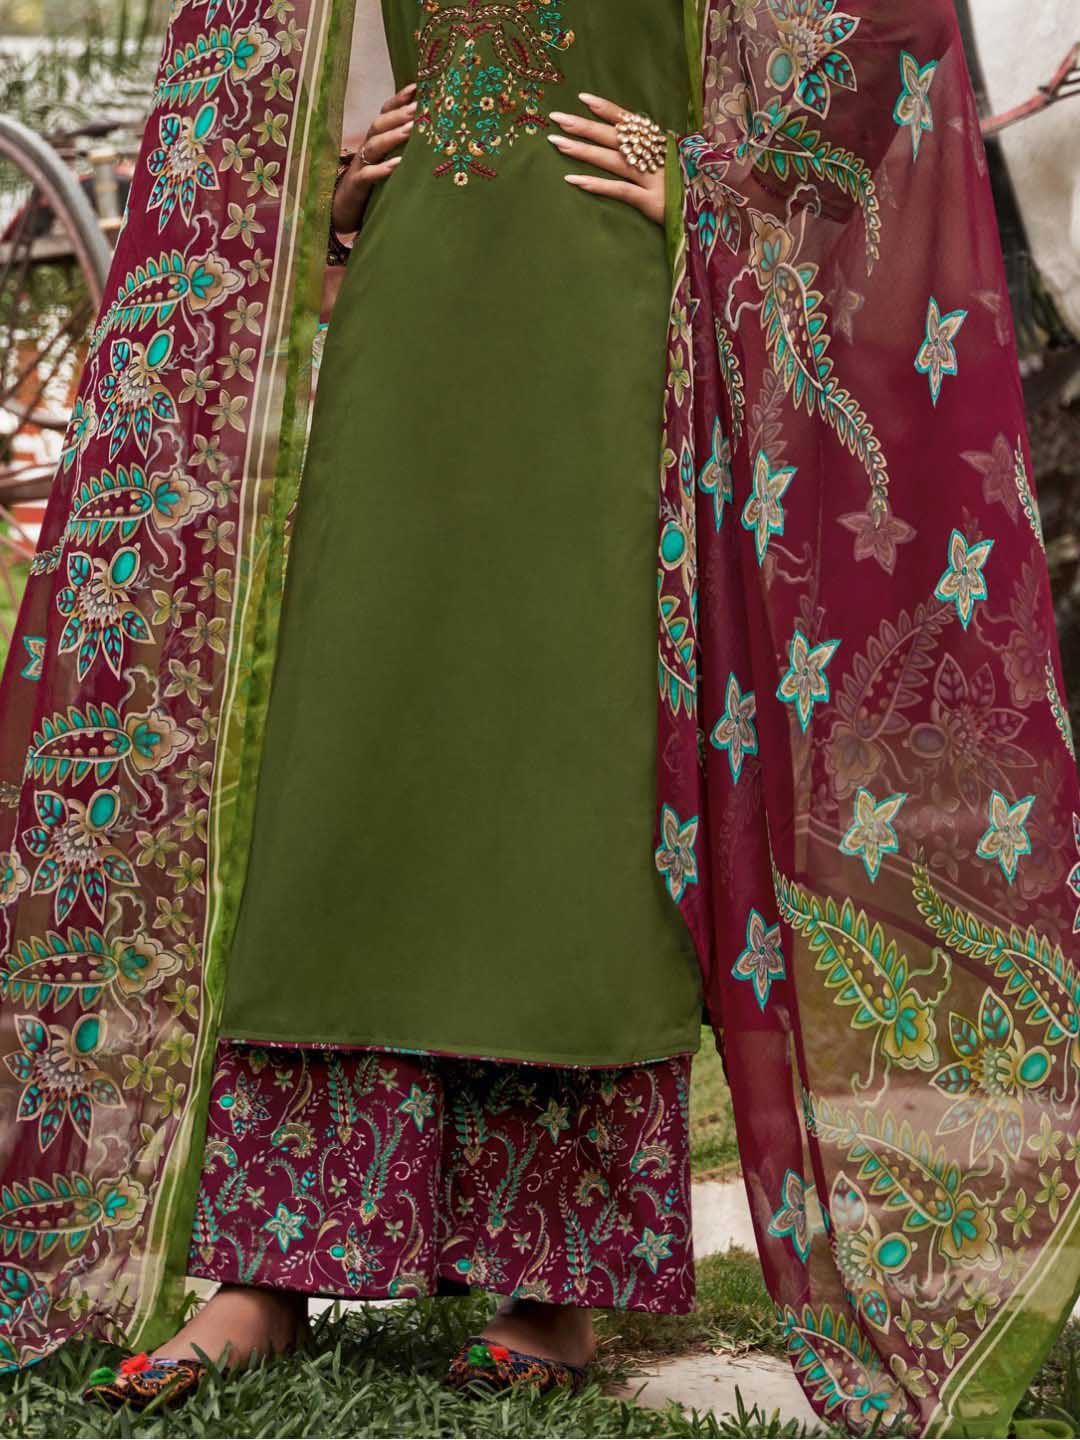 Unstitched Cotton Salwar Suit Green Dress Material with Embroidery Zulfat